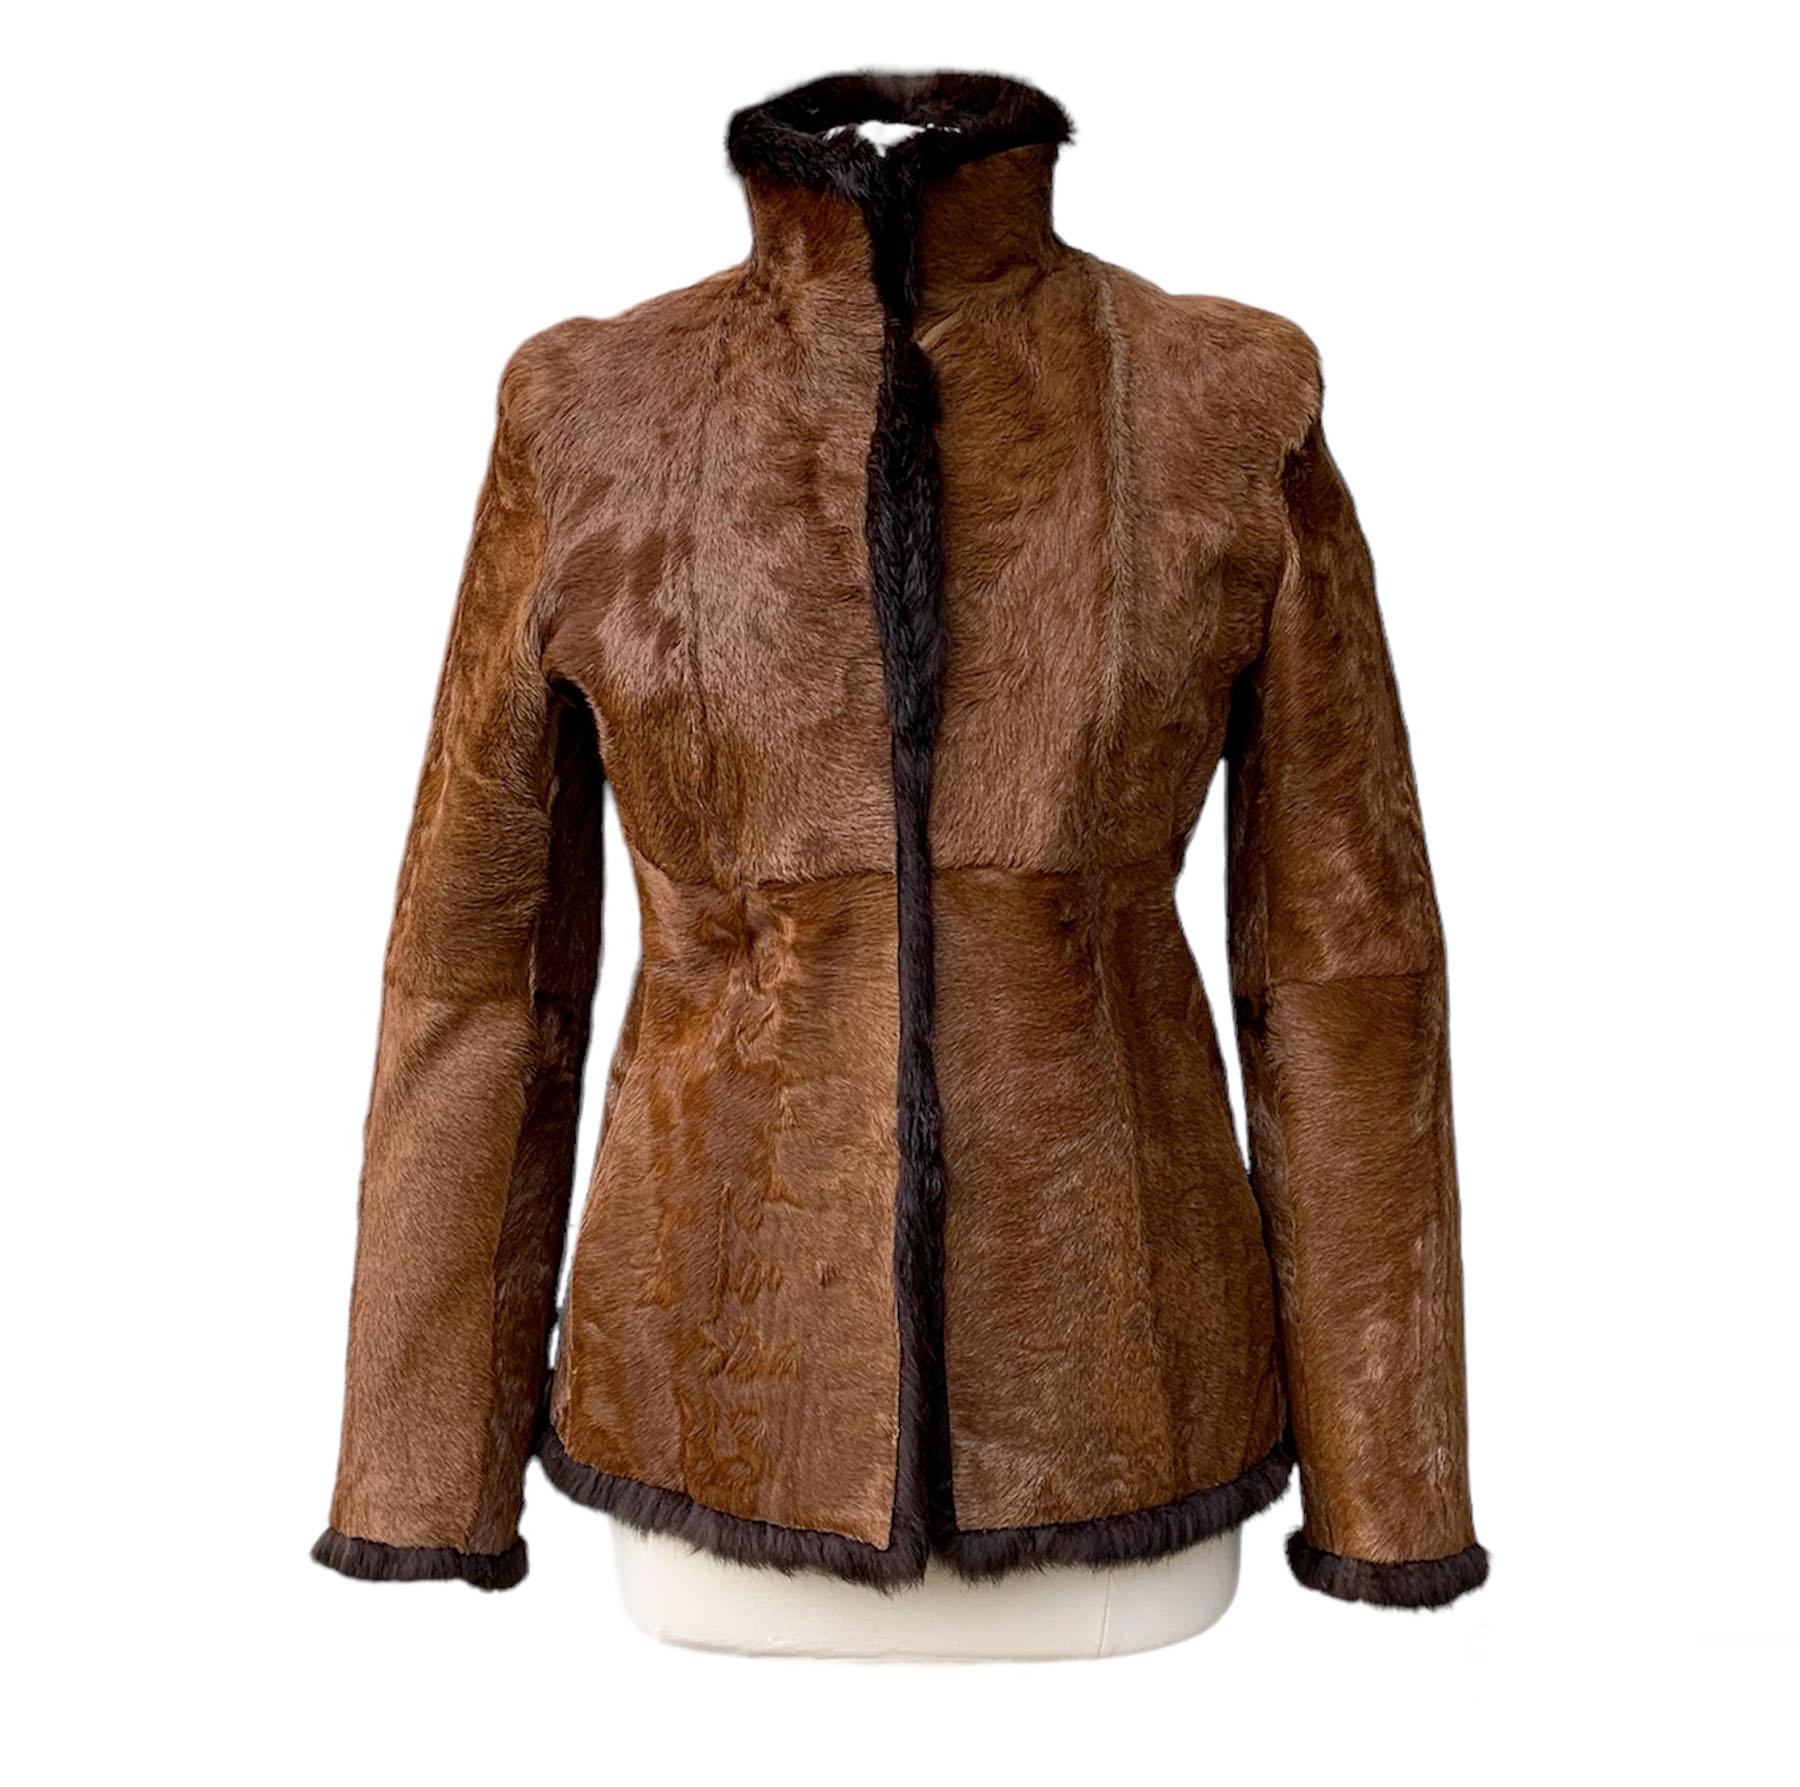 Tom Ford for Gucci Reversible Brown Fur Jacket
1999 Collection
Italian size - 42
Brown Color Calf Hair Reverse to Dark Brown Color Rabbit Fur.
Split Pockets at Sides. Hook and Eye Closure.
Measurements: Length - 27 inches, Sleeve - 25 inches, Armpit